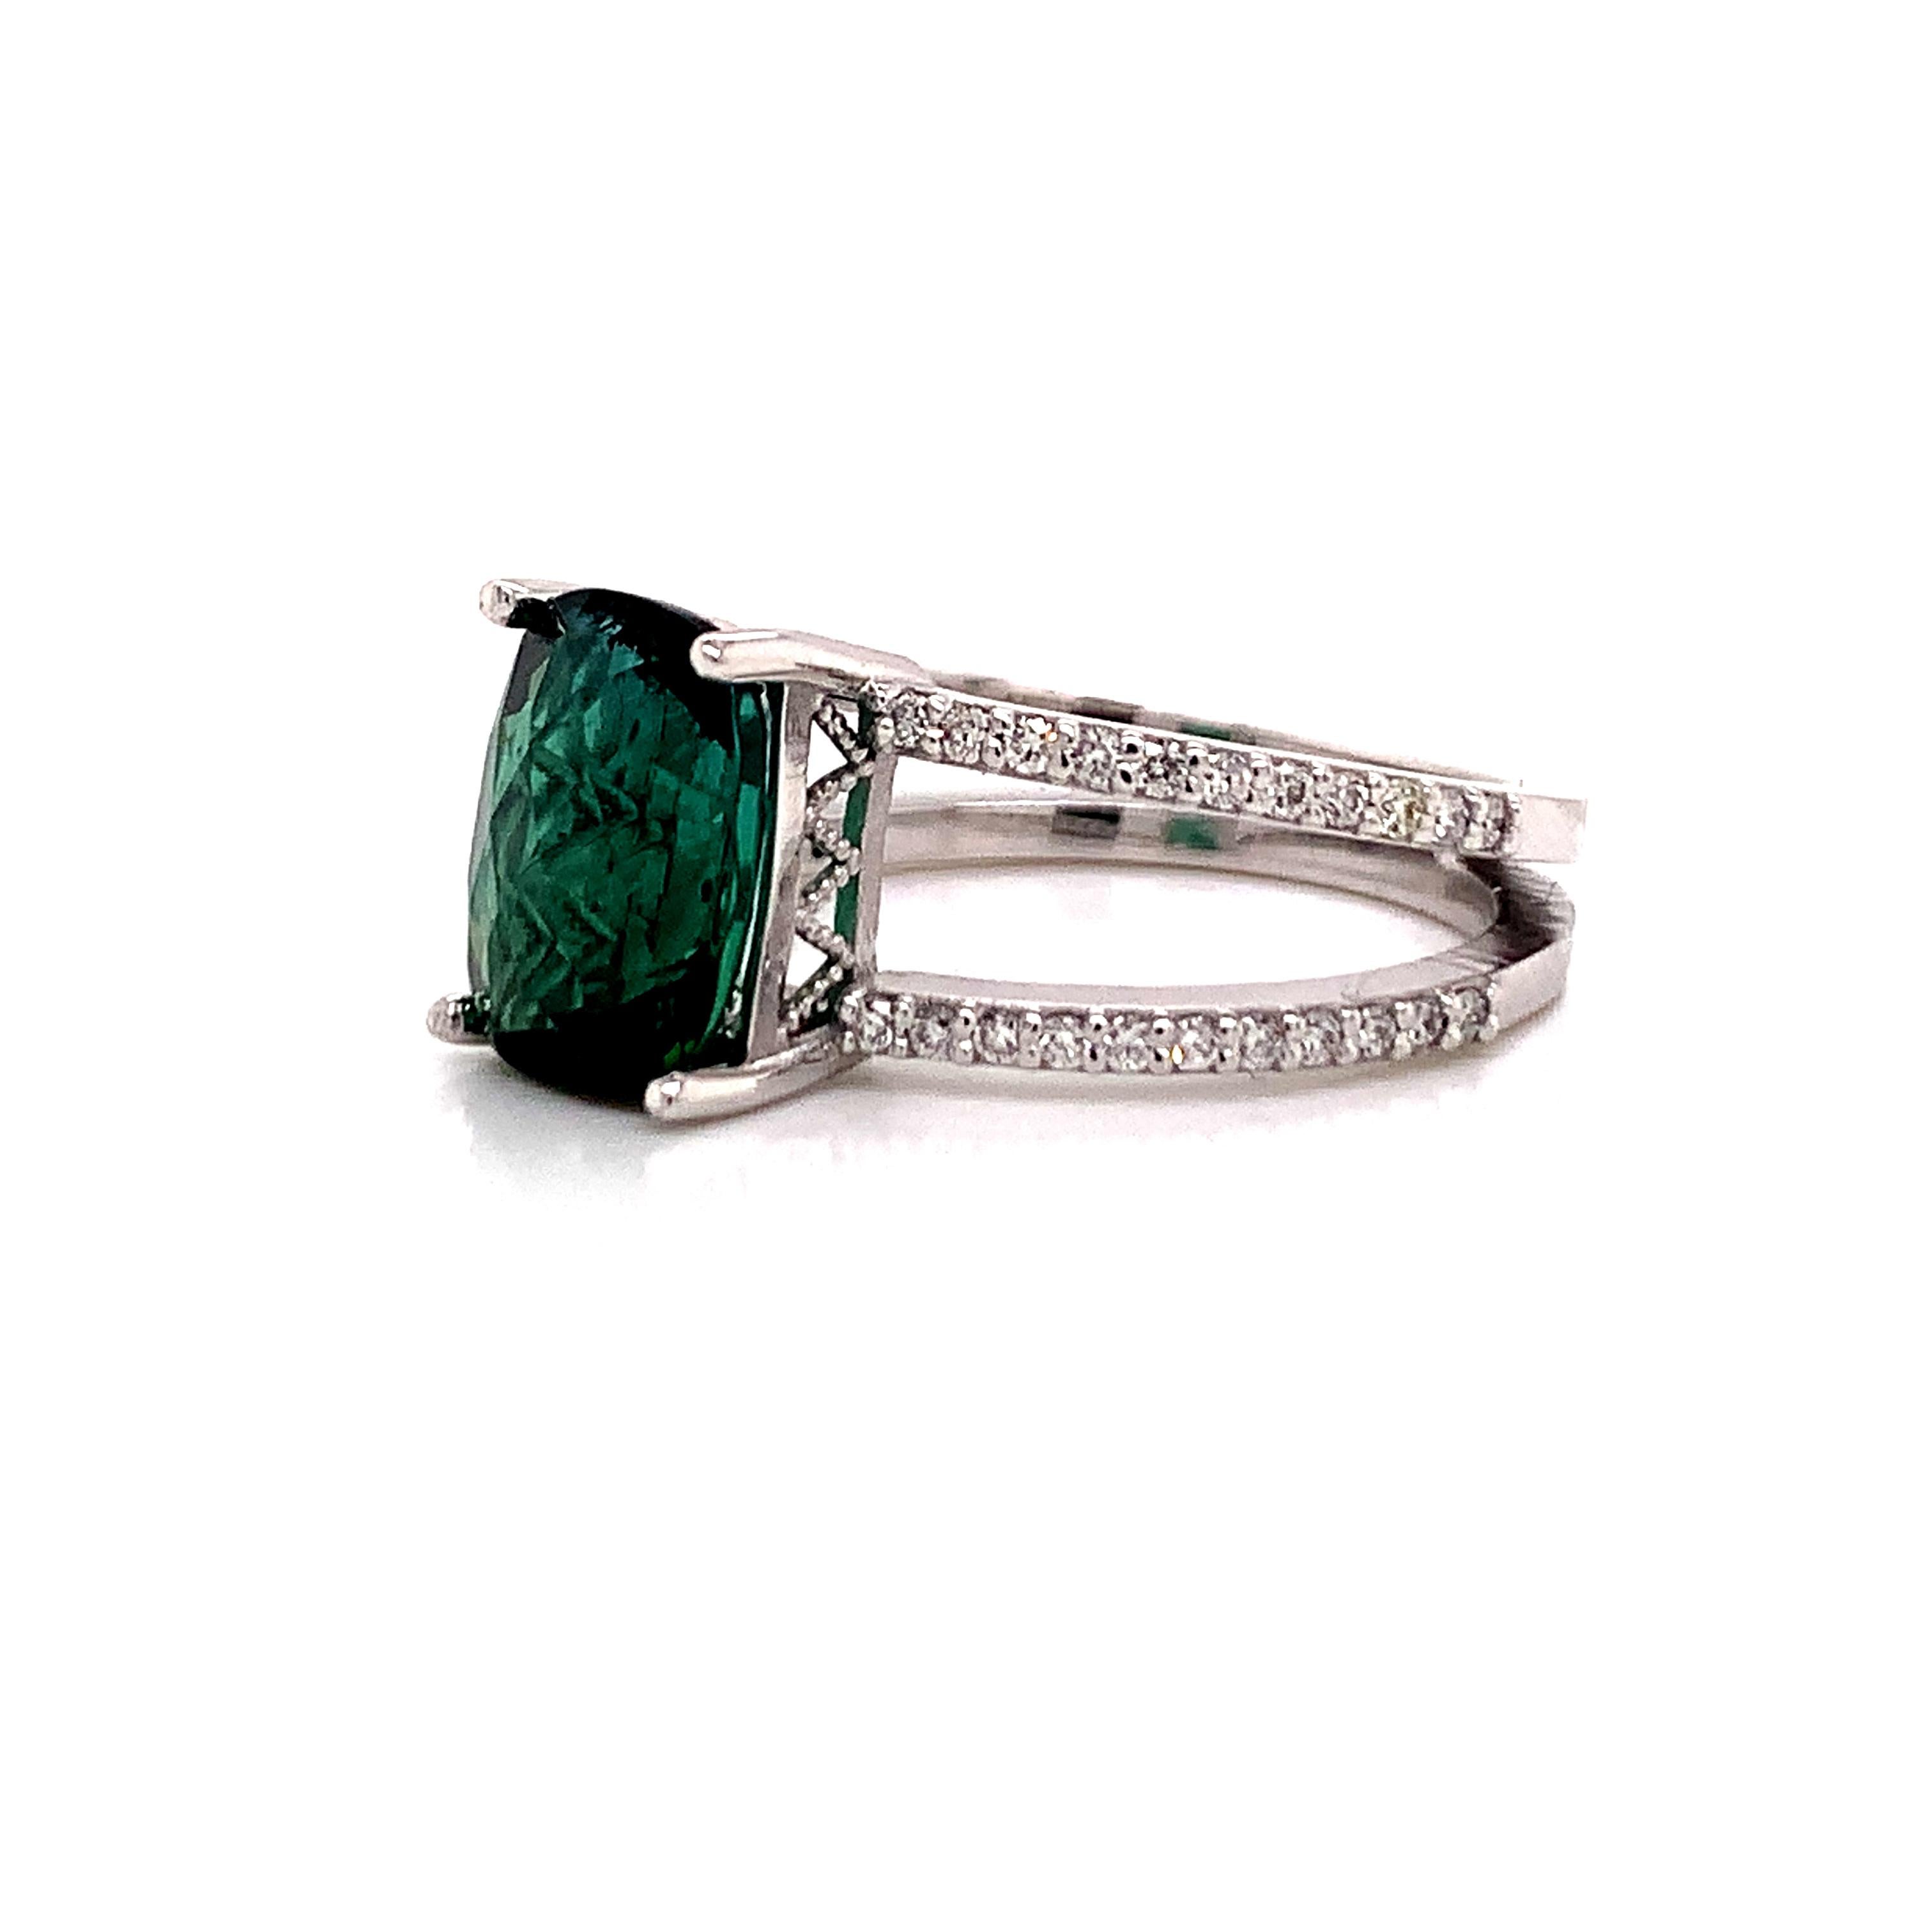 Natural Tourmaline Diamond Ring 14k White Gold 3.33 TCW Certified For Sale 3